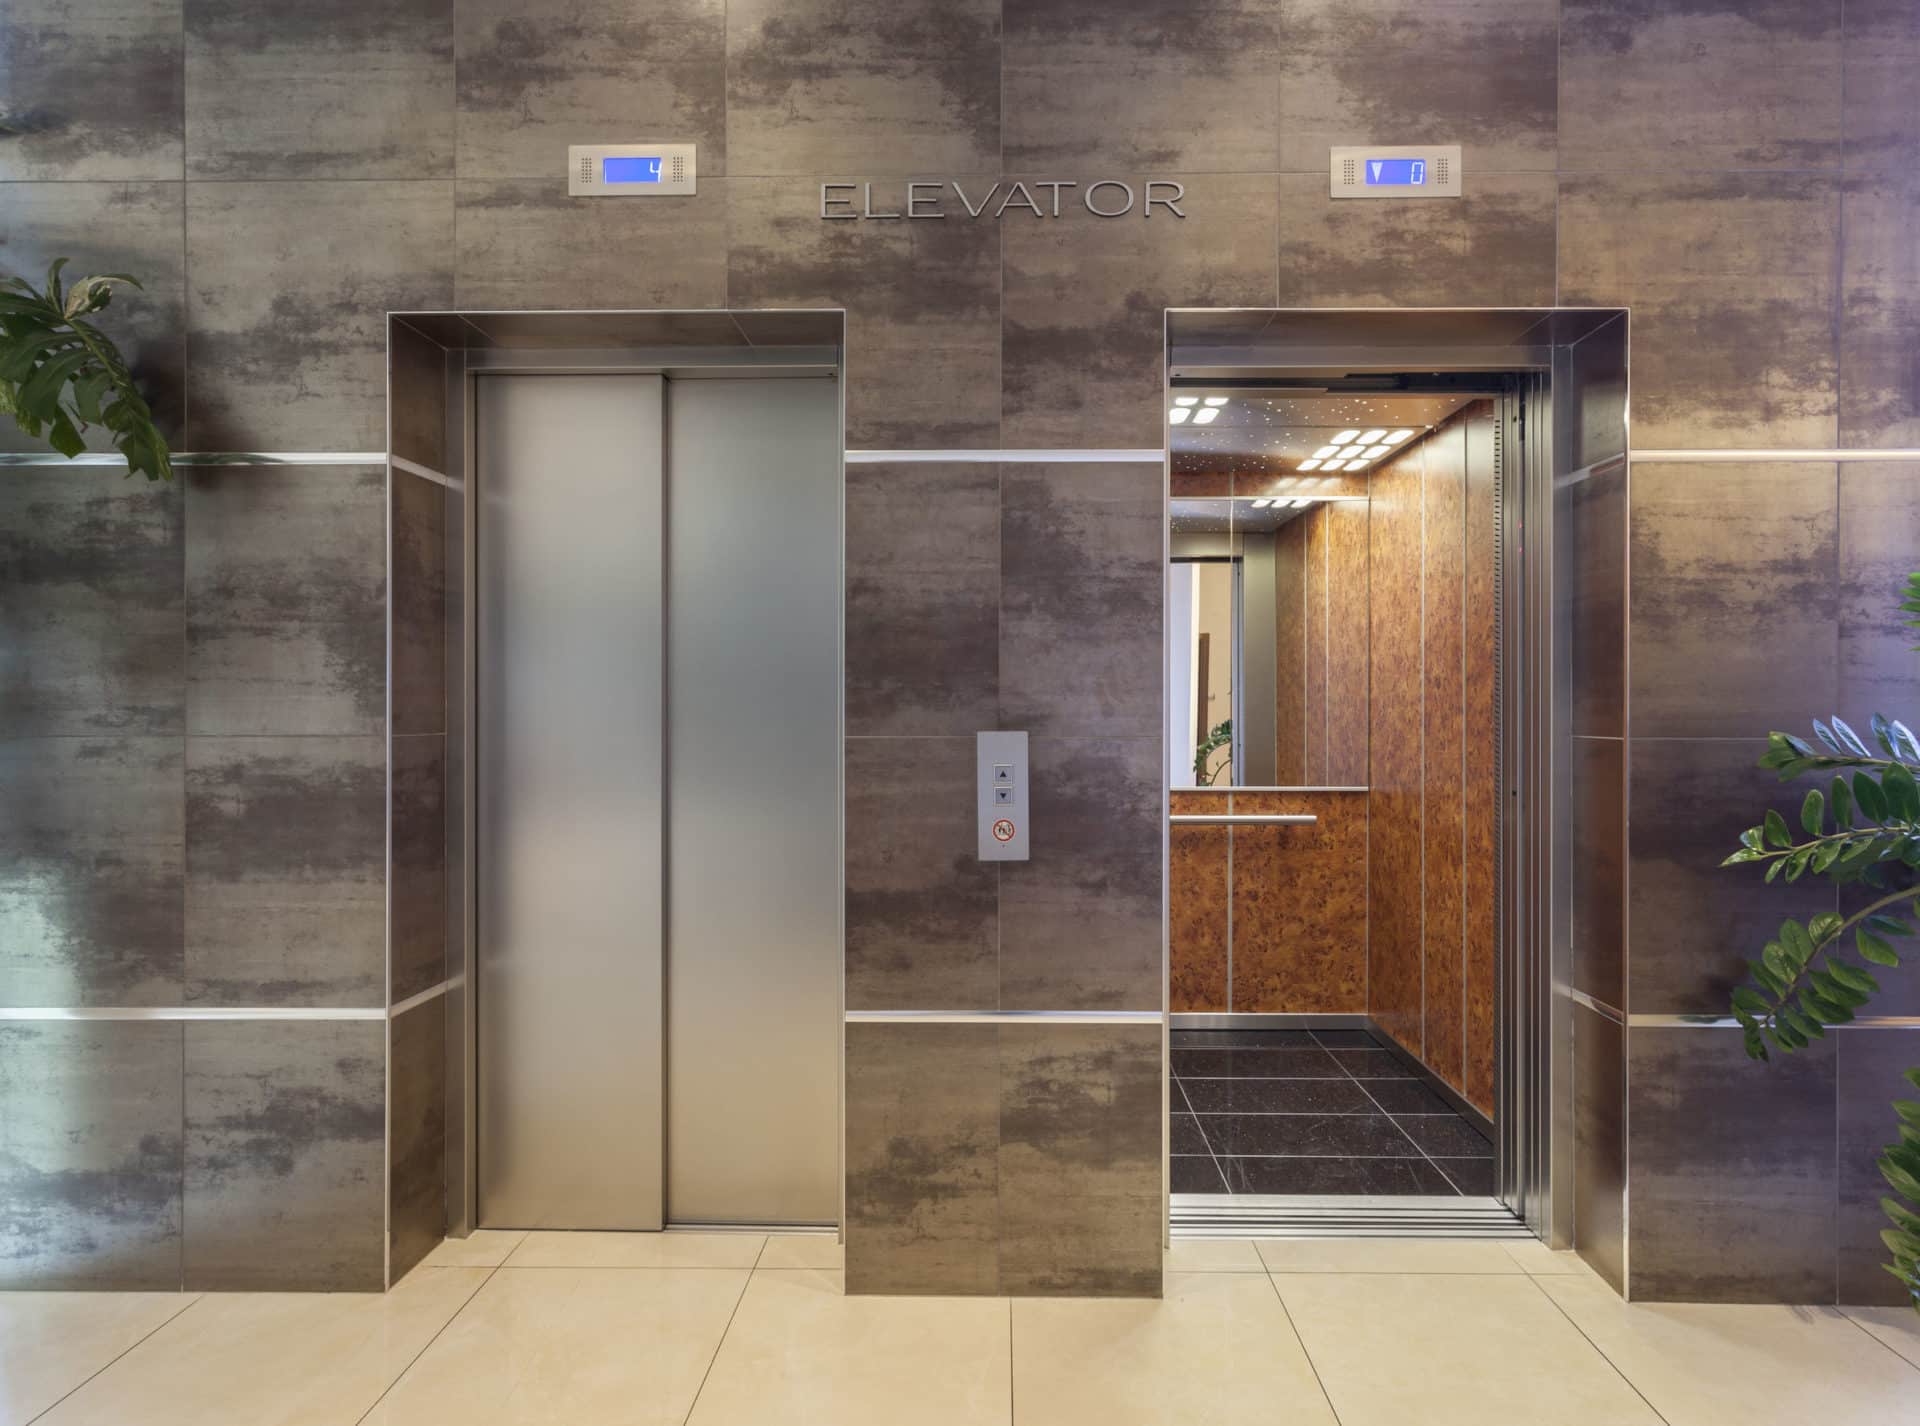 New York Elevator Accidents – Why They Happen